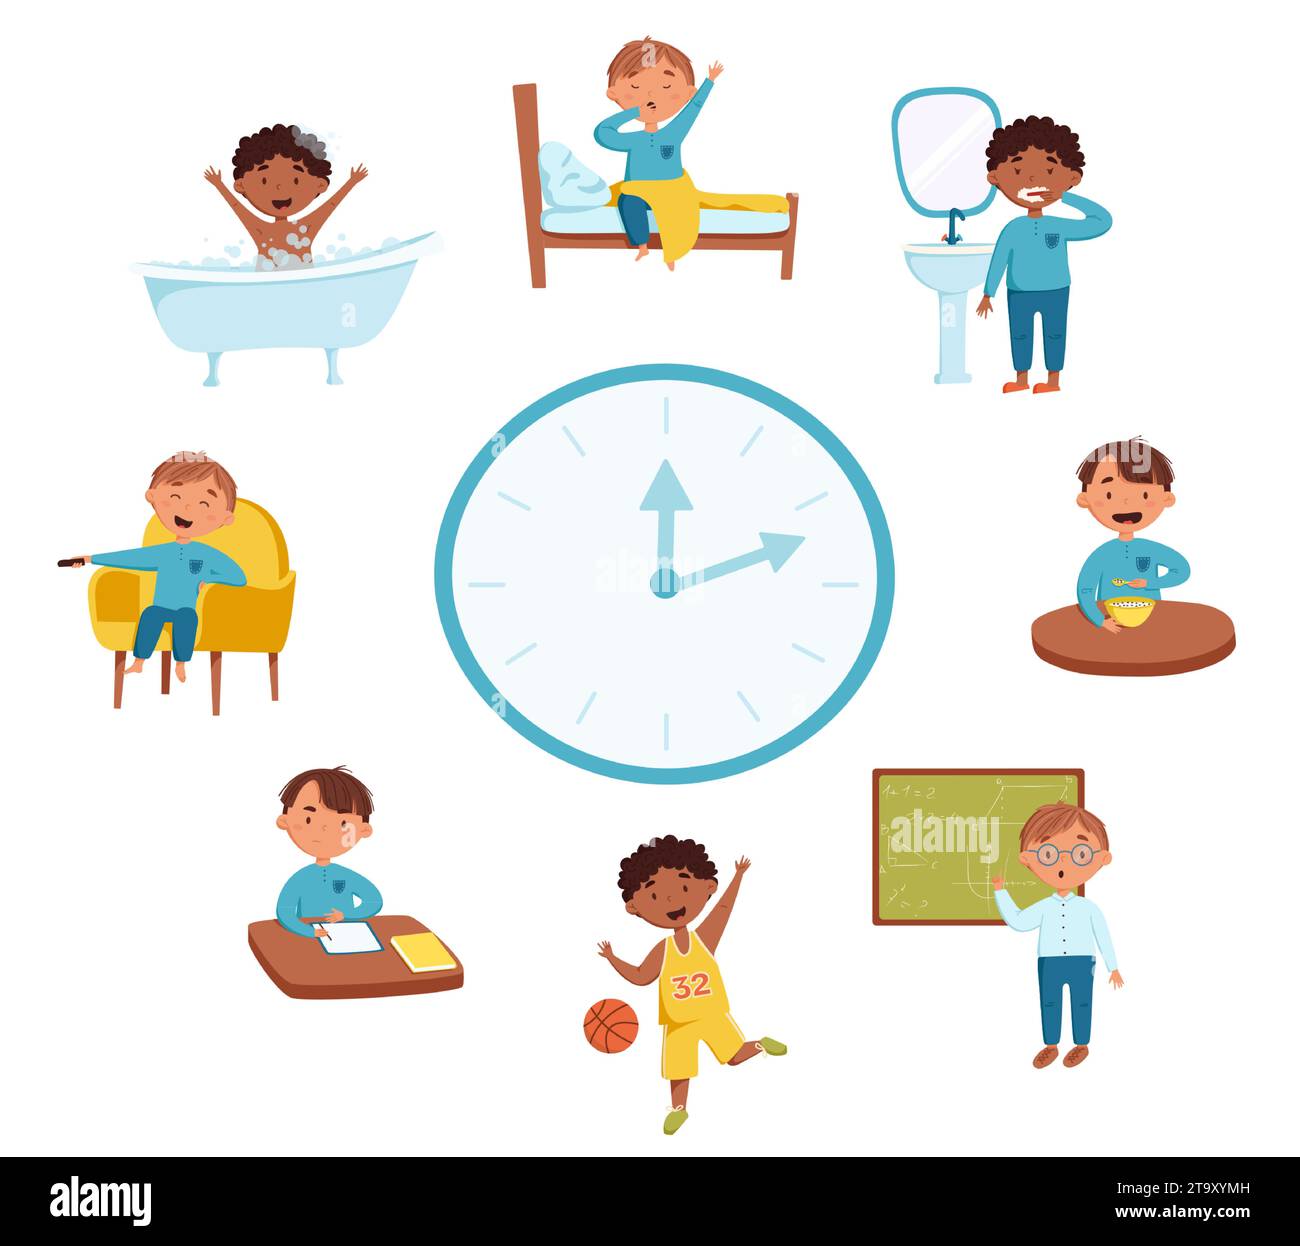 Cute and happy boys in different situations vector illustration. Daily routine with blue simple watches. Isolated on white background. Stock Vector